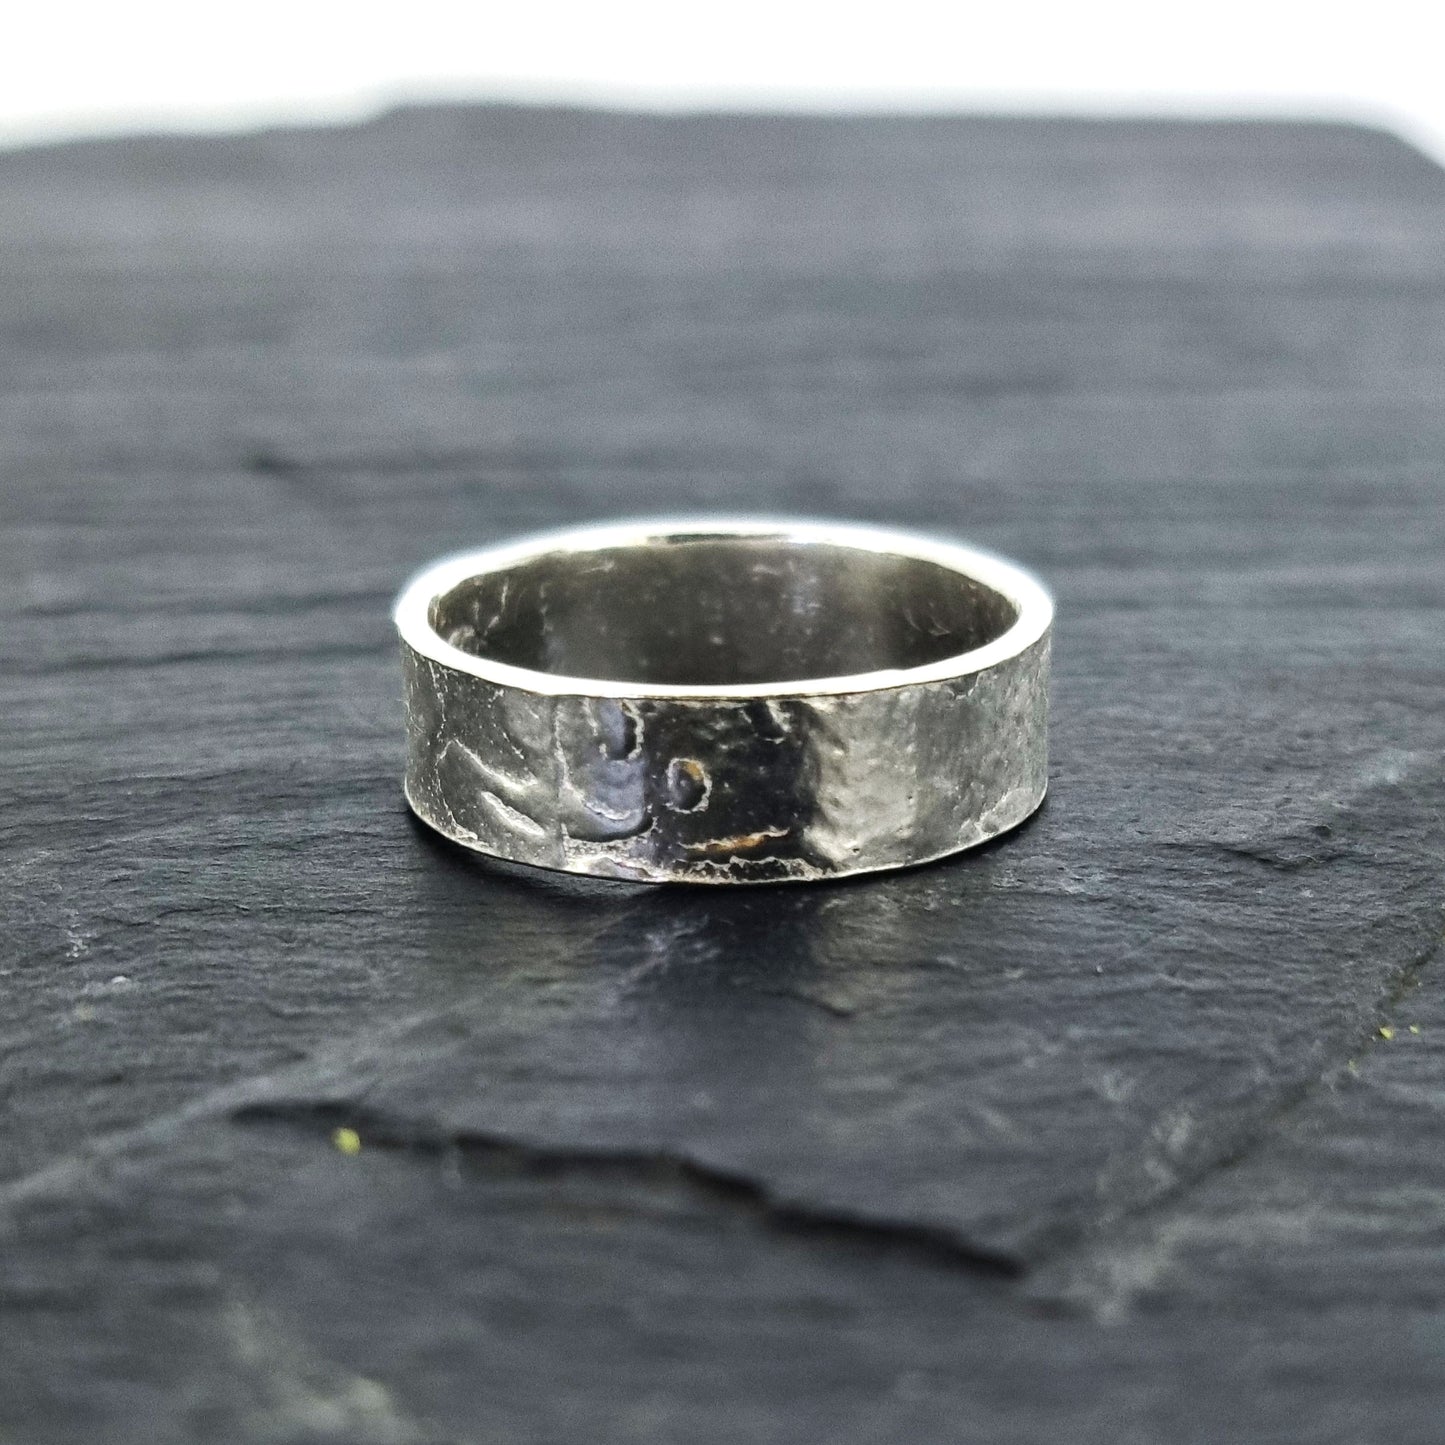 Silver Earth band ring